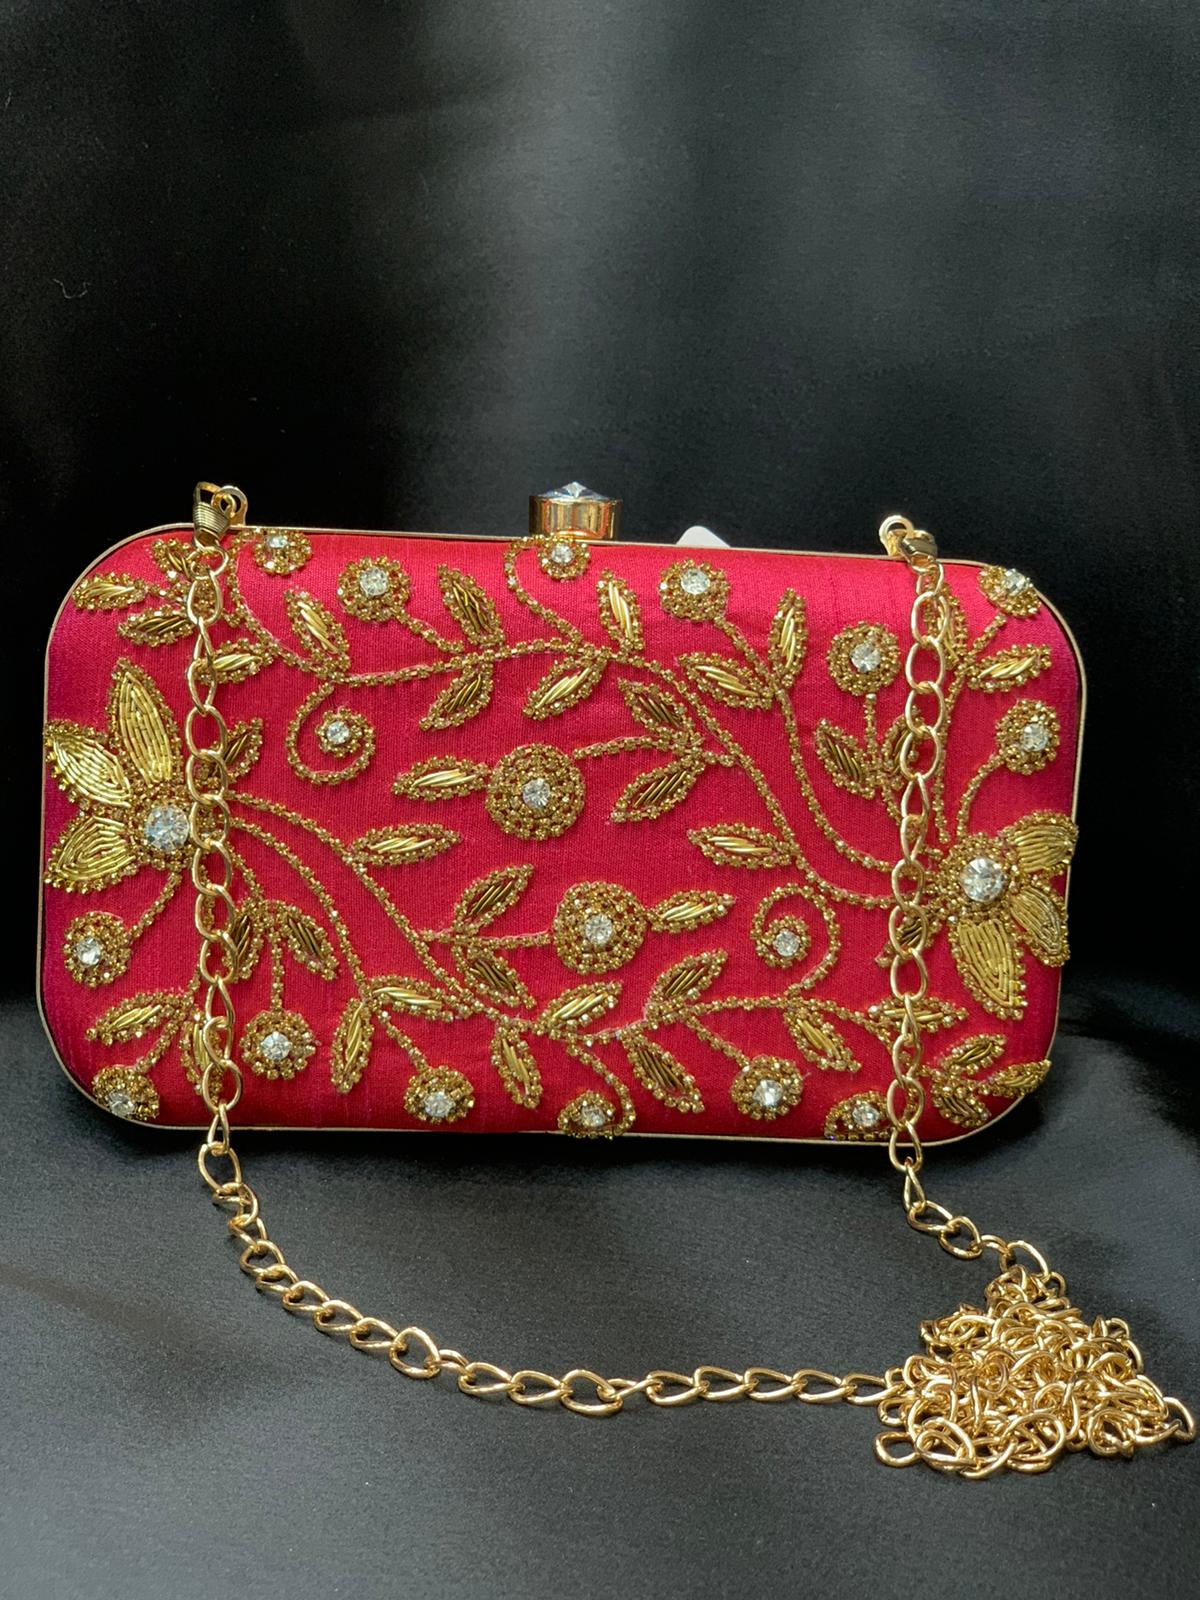 BEST INDIAN HANDICRAFT Unique Resin clutch bag Crystal stone Handmade Clutch  Bag Embroidery Clutch Bag Purse For Bridal, Casual, Party, Wedding